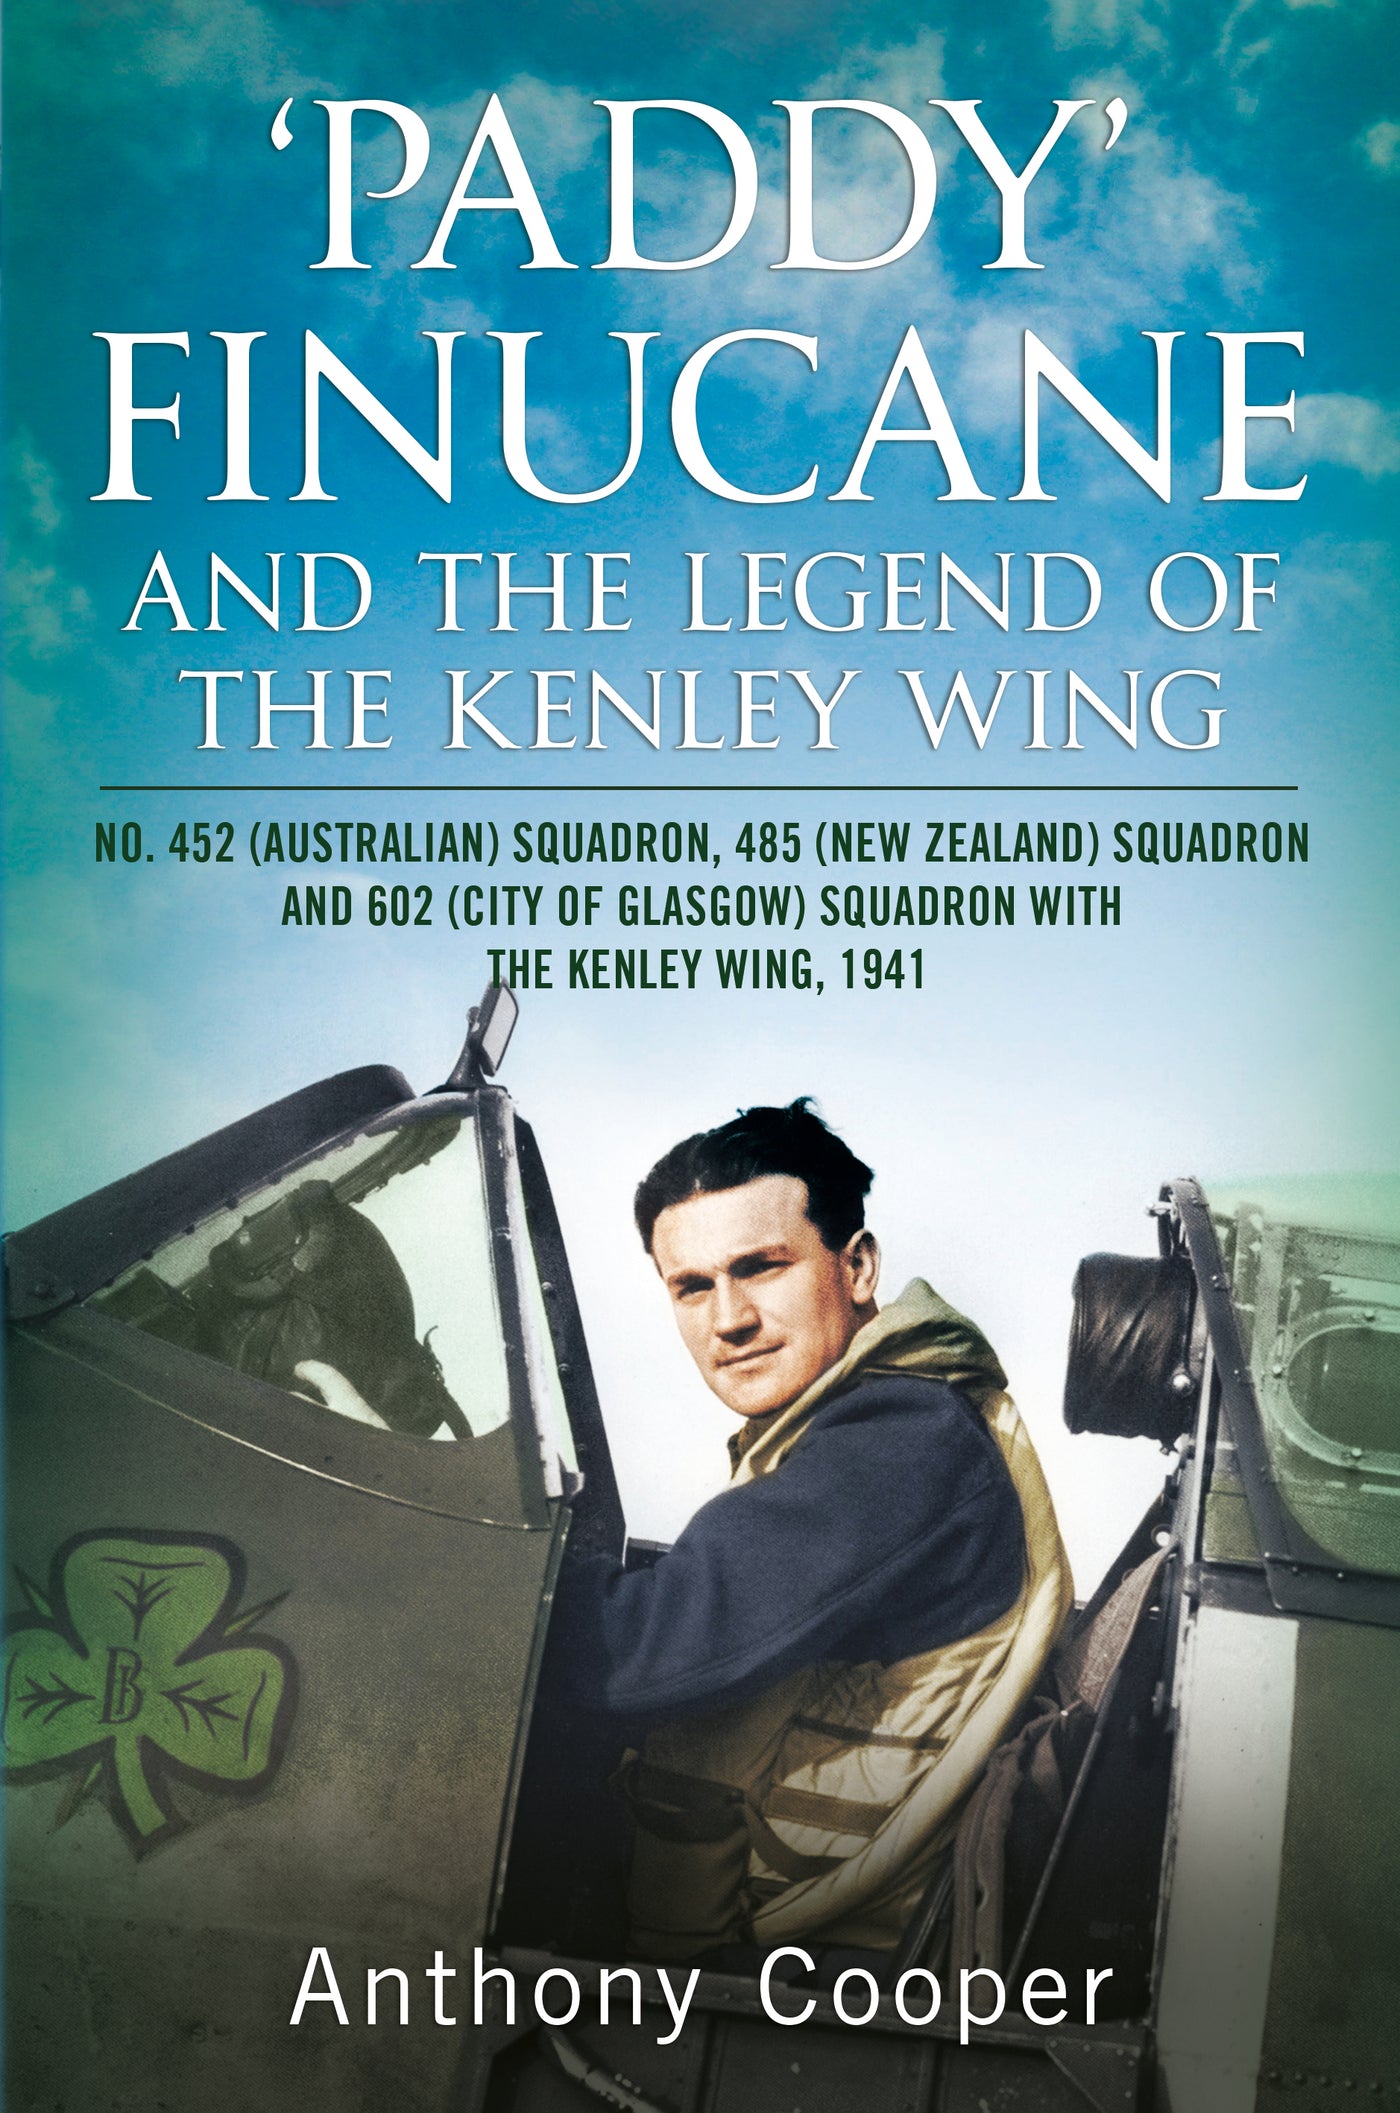 ’Paddy’ Finucane and the legend of the Kenley Wing